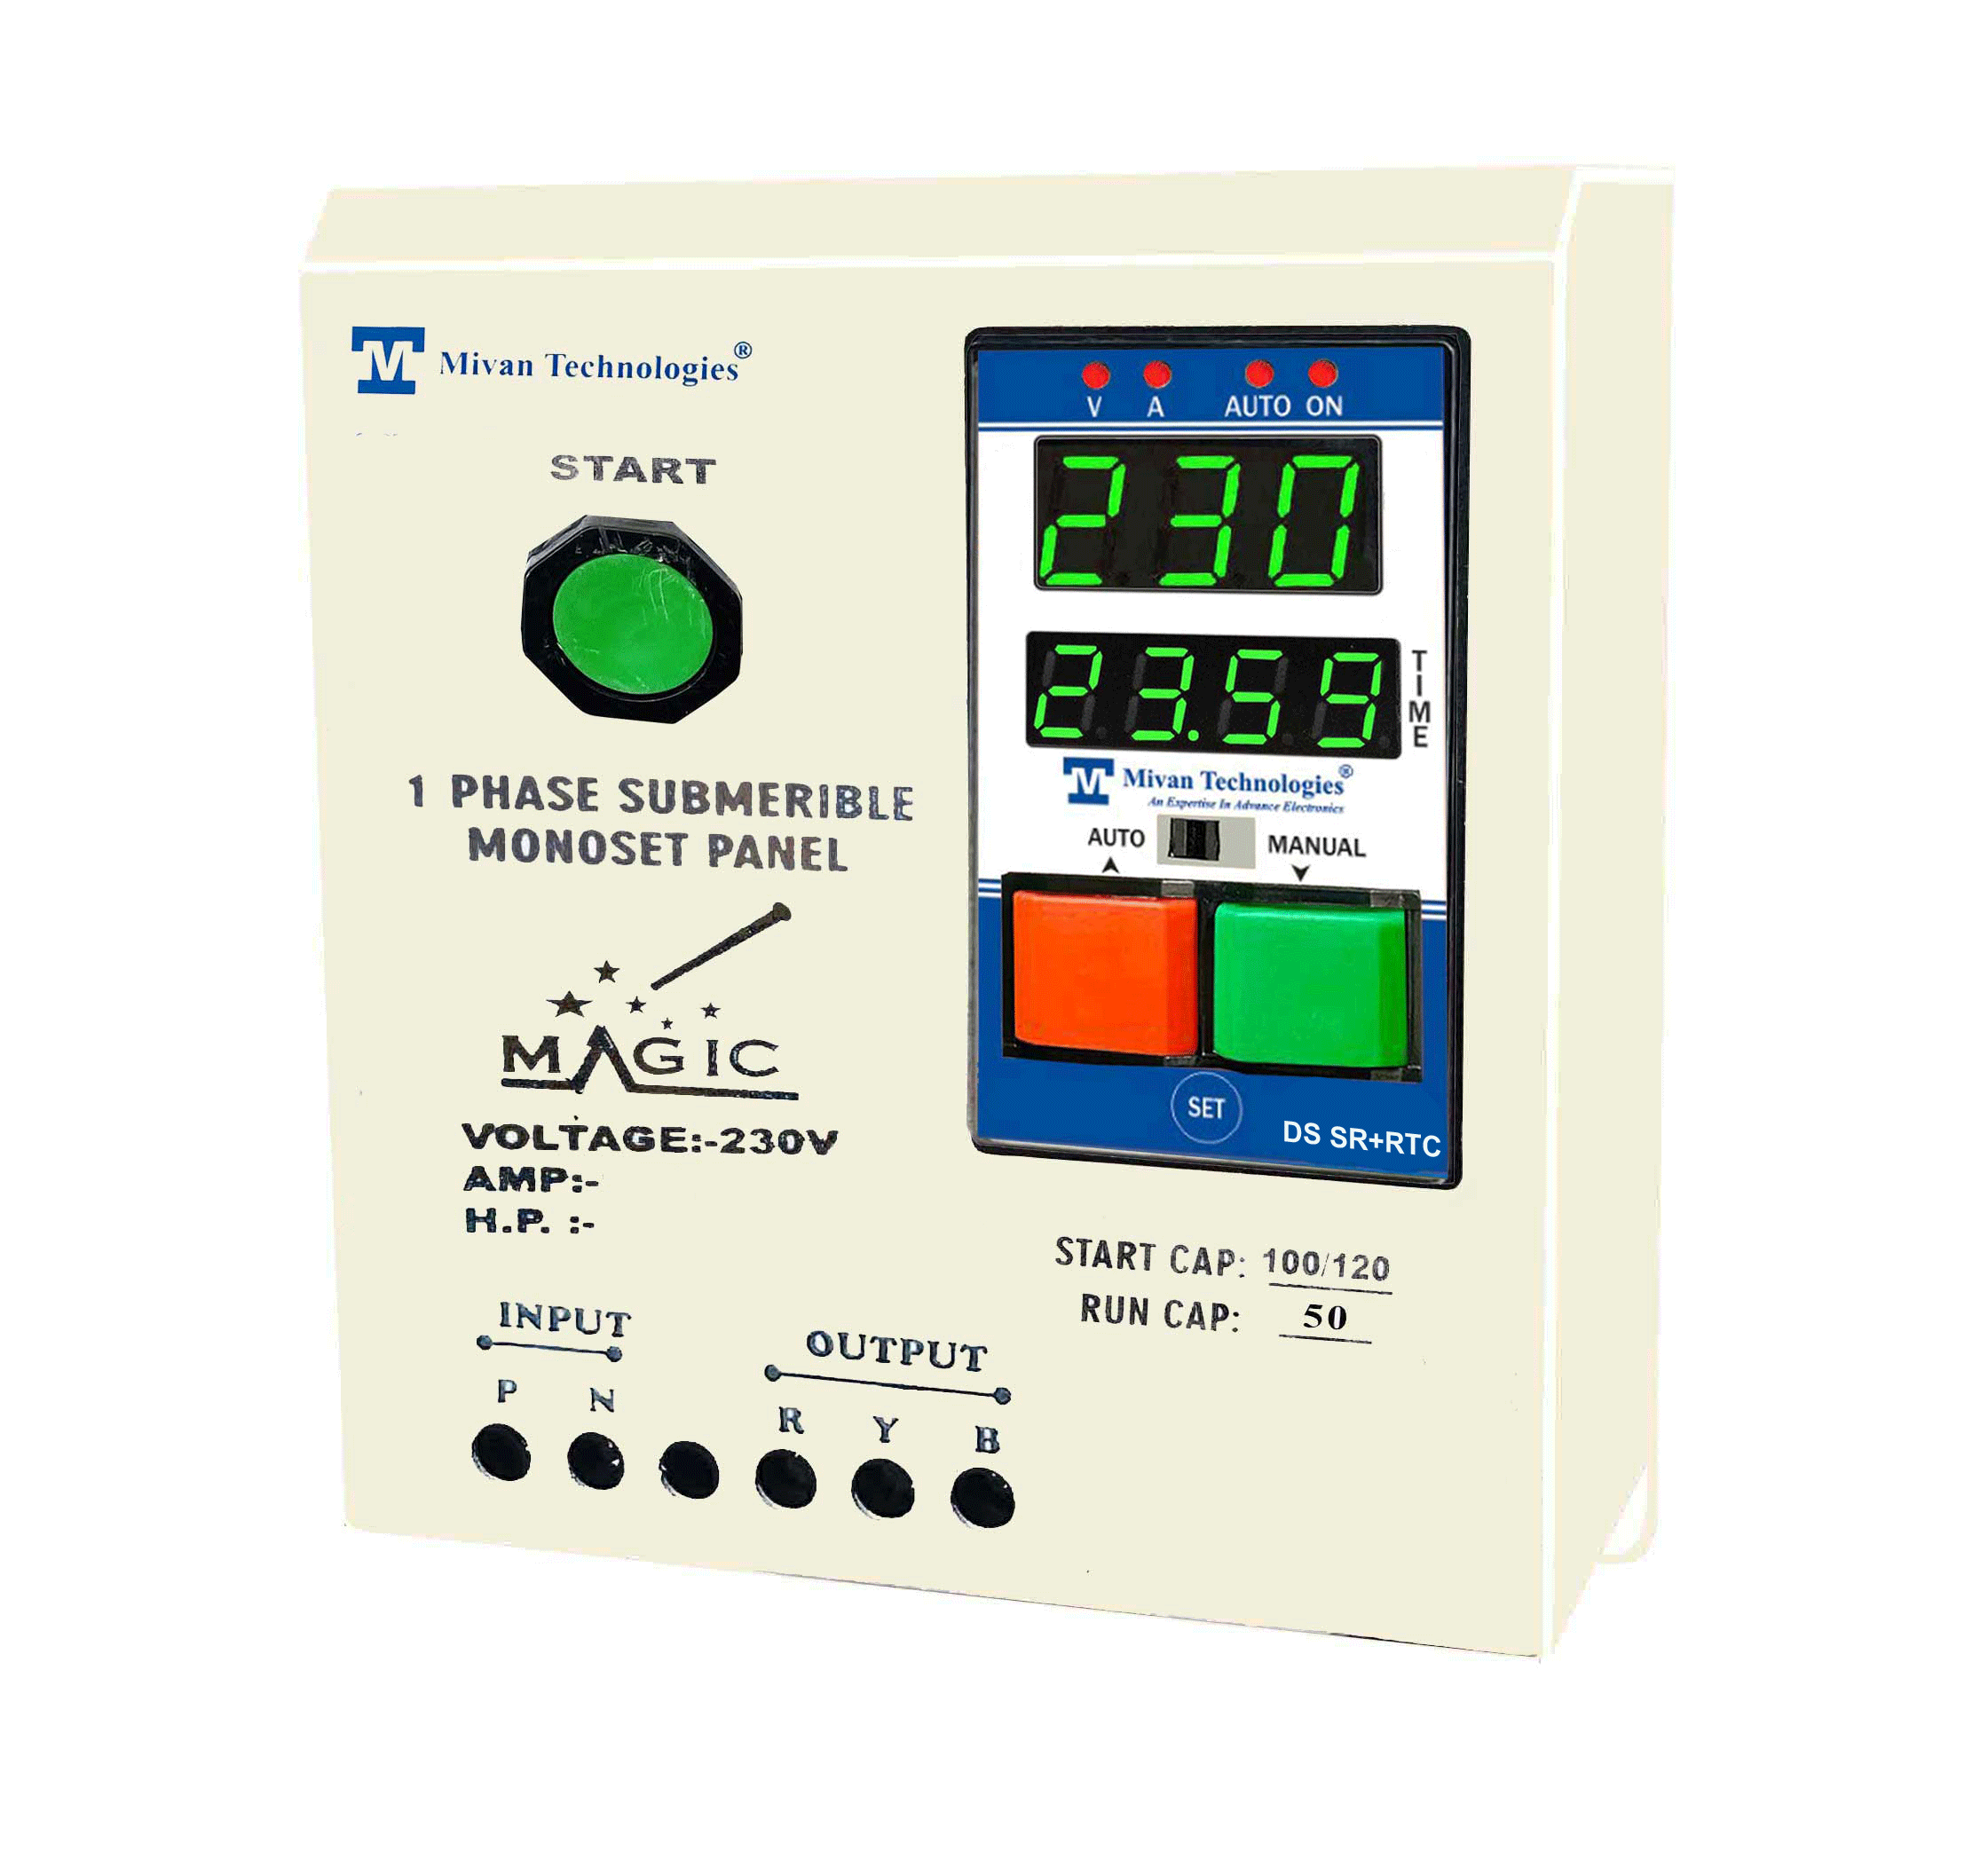 DS SR RTC Single Phase Digital starter with REAL TIME TIMER with V A meter with HV LV OL DRY PROTECTION with cyclic TIMER